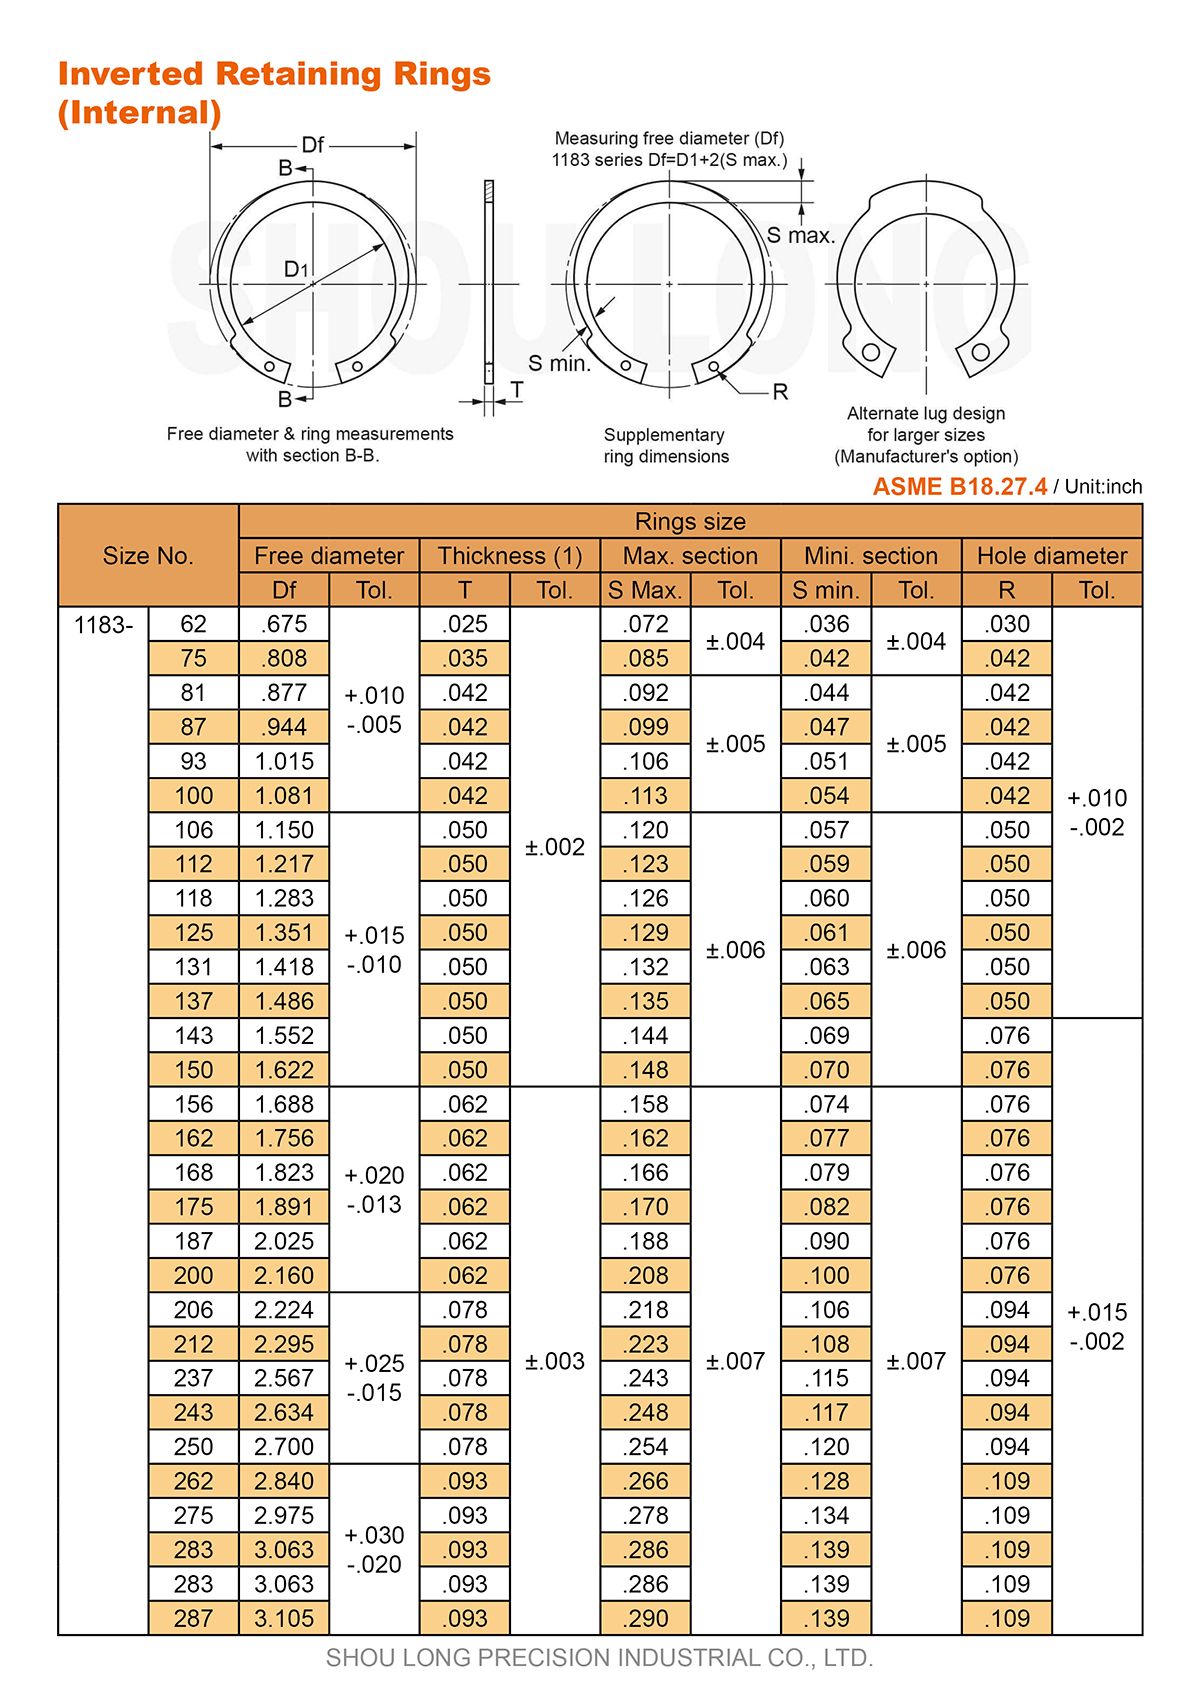 Spec of Inch Inverted Retaining Rings for Bores ASME/ANSI B18.27.4 - 1